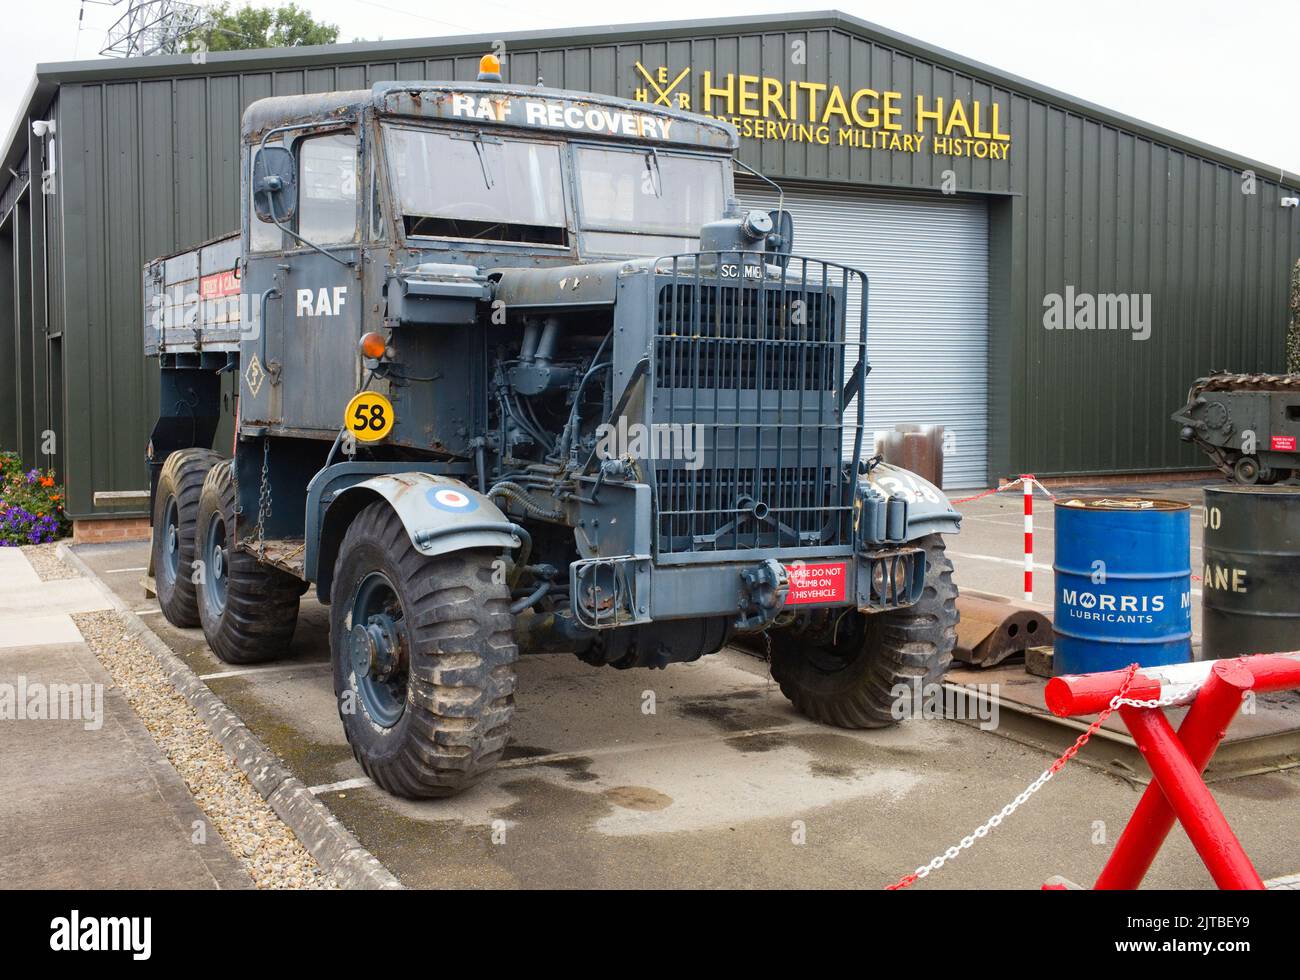 Scammel RAF recoverty truck at the Eden Camp wartime museum, Malton, Yorkshire Stock Photo